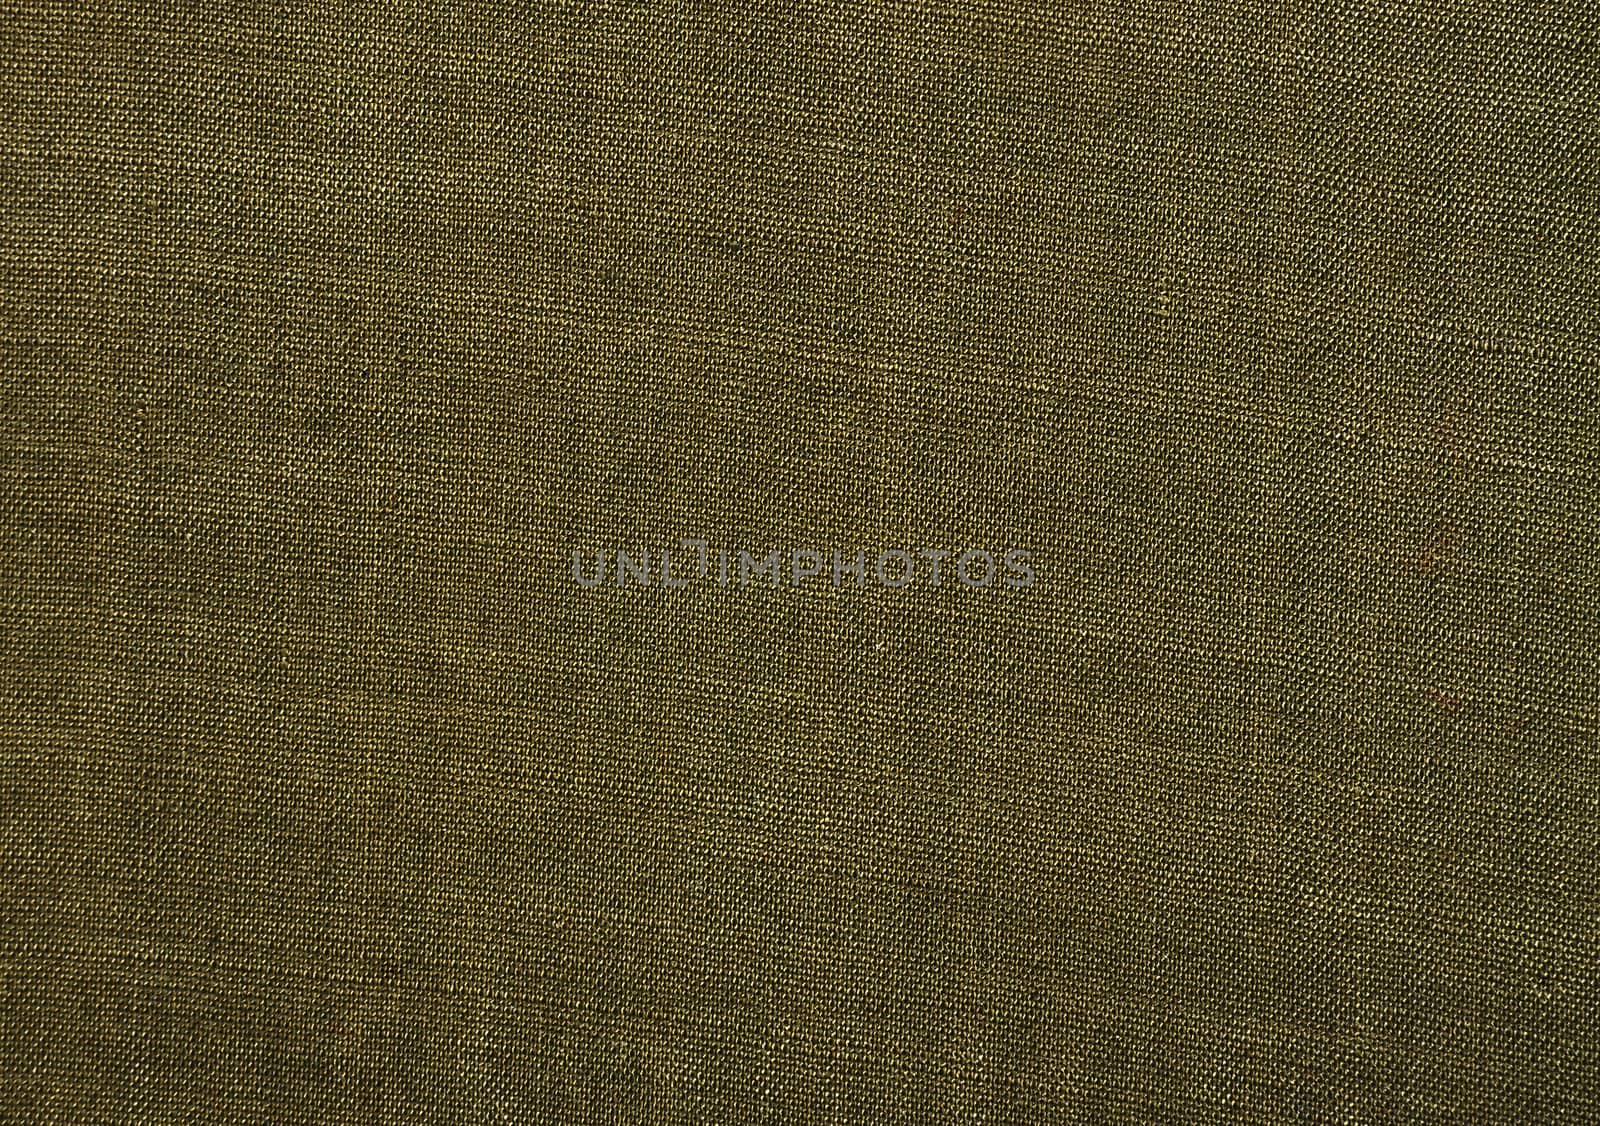  brown-yellow fabric texture for  background 